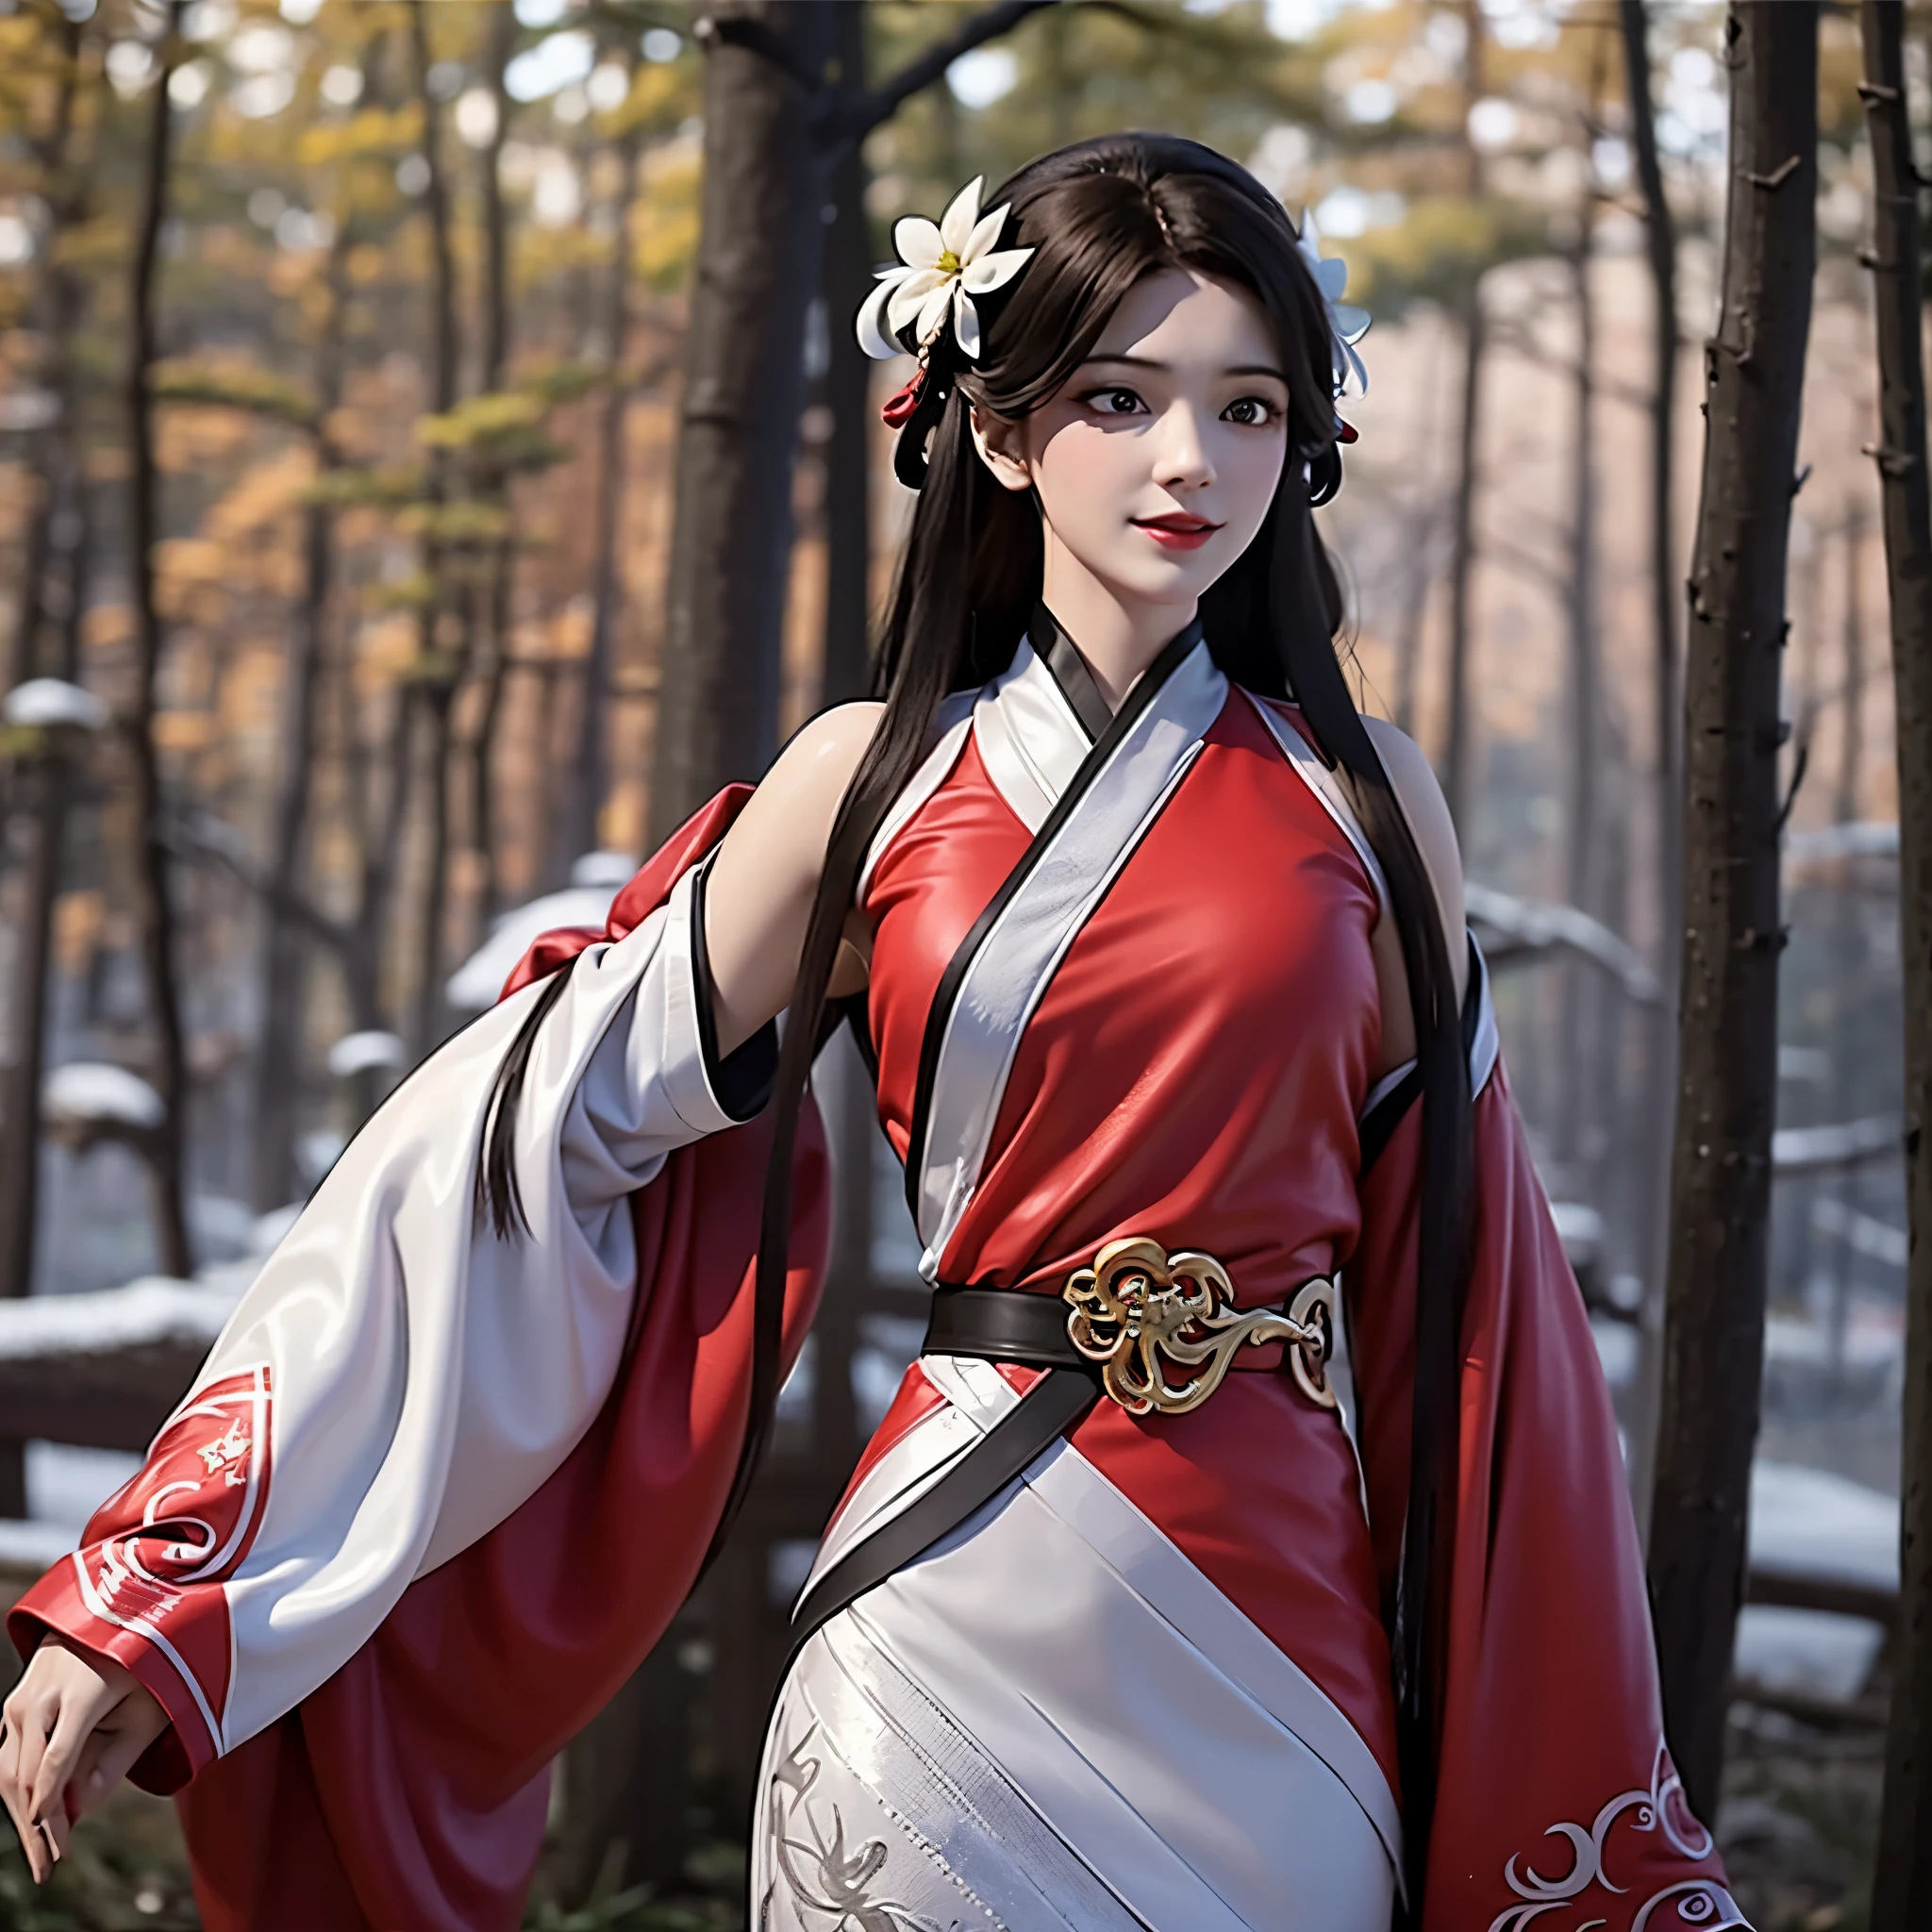 1 solo , Beautiful girl with long brown hair, bright brown eyes, sweet smile, snow white skin,Her long hair is decorated with red mulberry flowers 🏵️,The girl wore a simple white hanfu with a red cloth tied around her waist, Forest setting filled with mulberry tree  ,central focusing on girl in graphics, realistic graphics, 8k, wearing white hanfu and red skirt hanfu